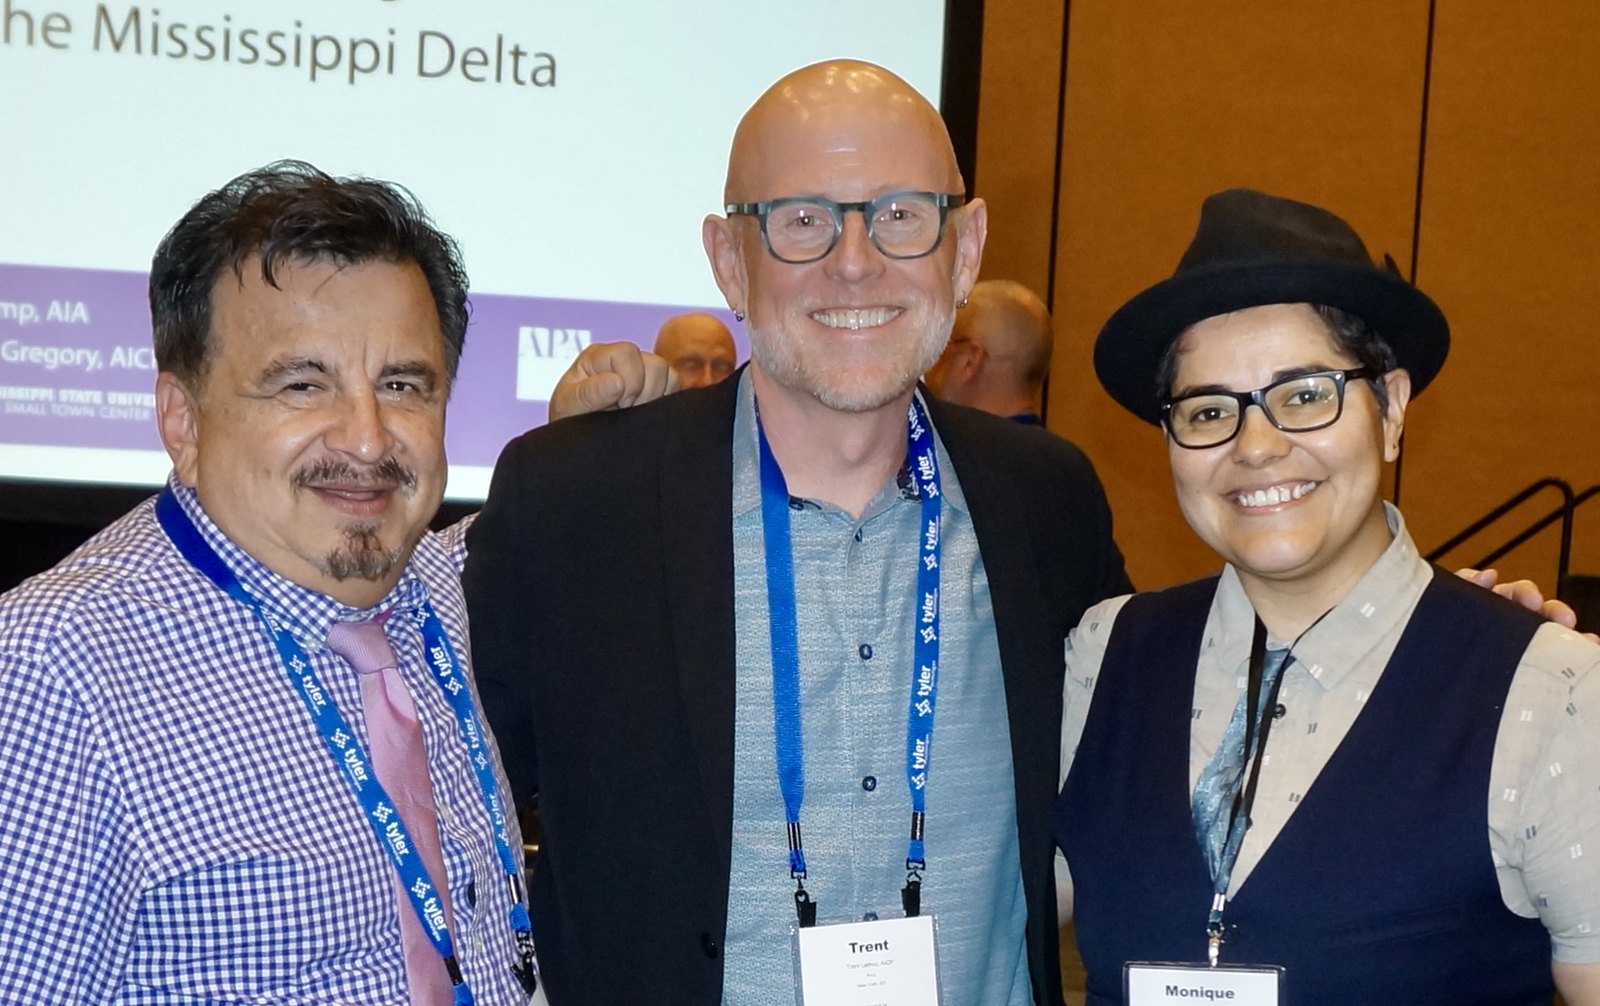 James Rojas with others at LGBTQ Workshop at 2019 American Planning Association National Conference. Source: James Rojas